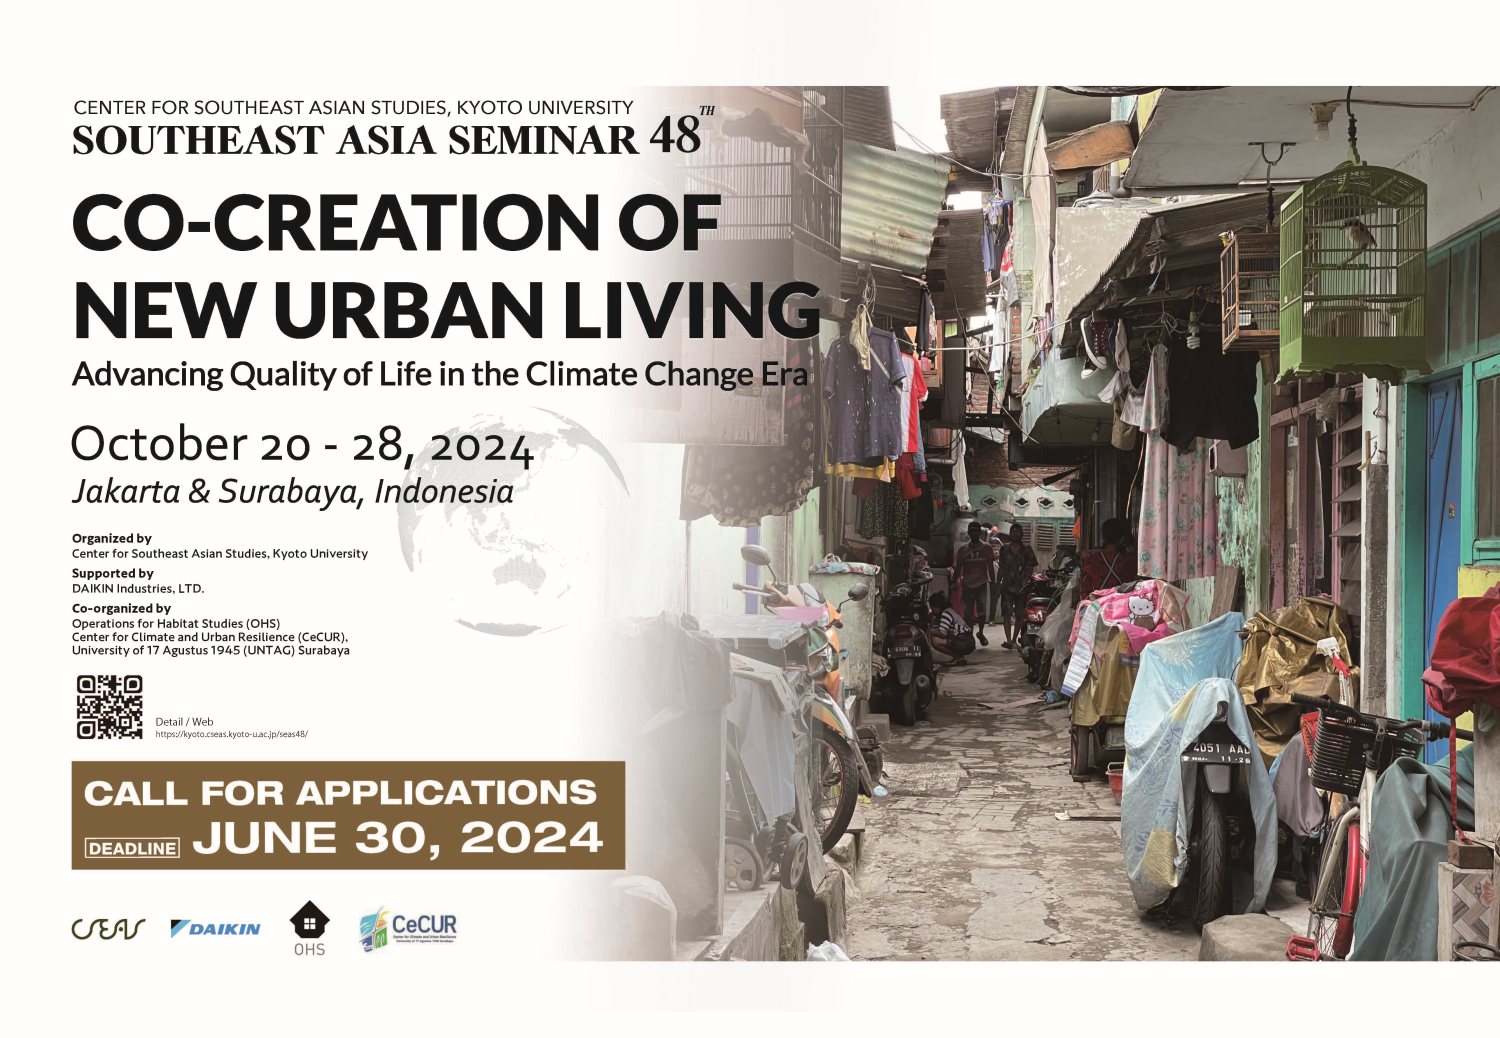 Call for Applications! The 48th Southeast Asia Seminar (Deadline: June 30, 2024)